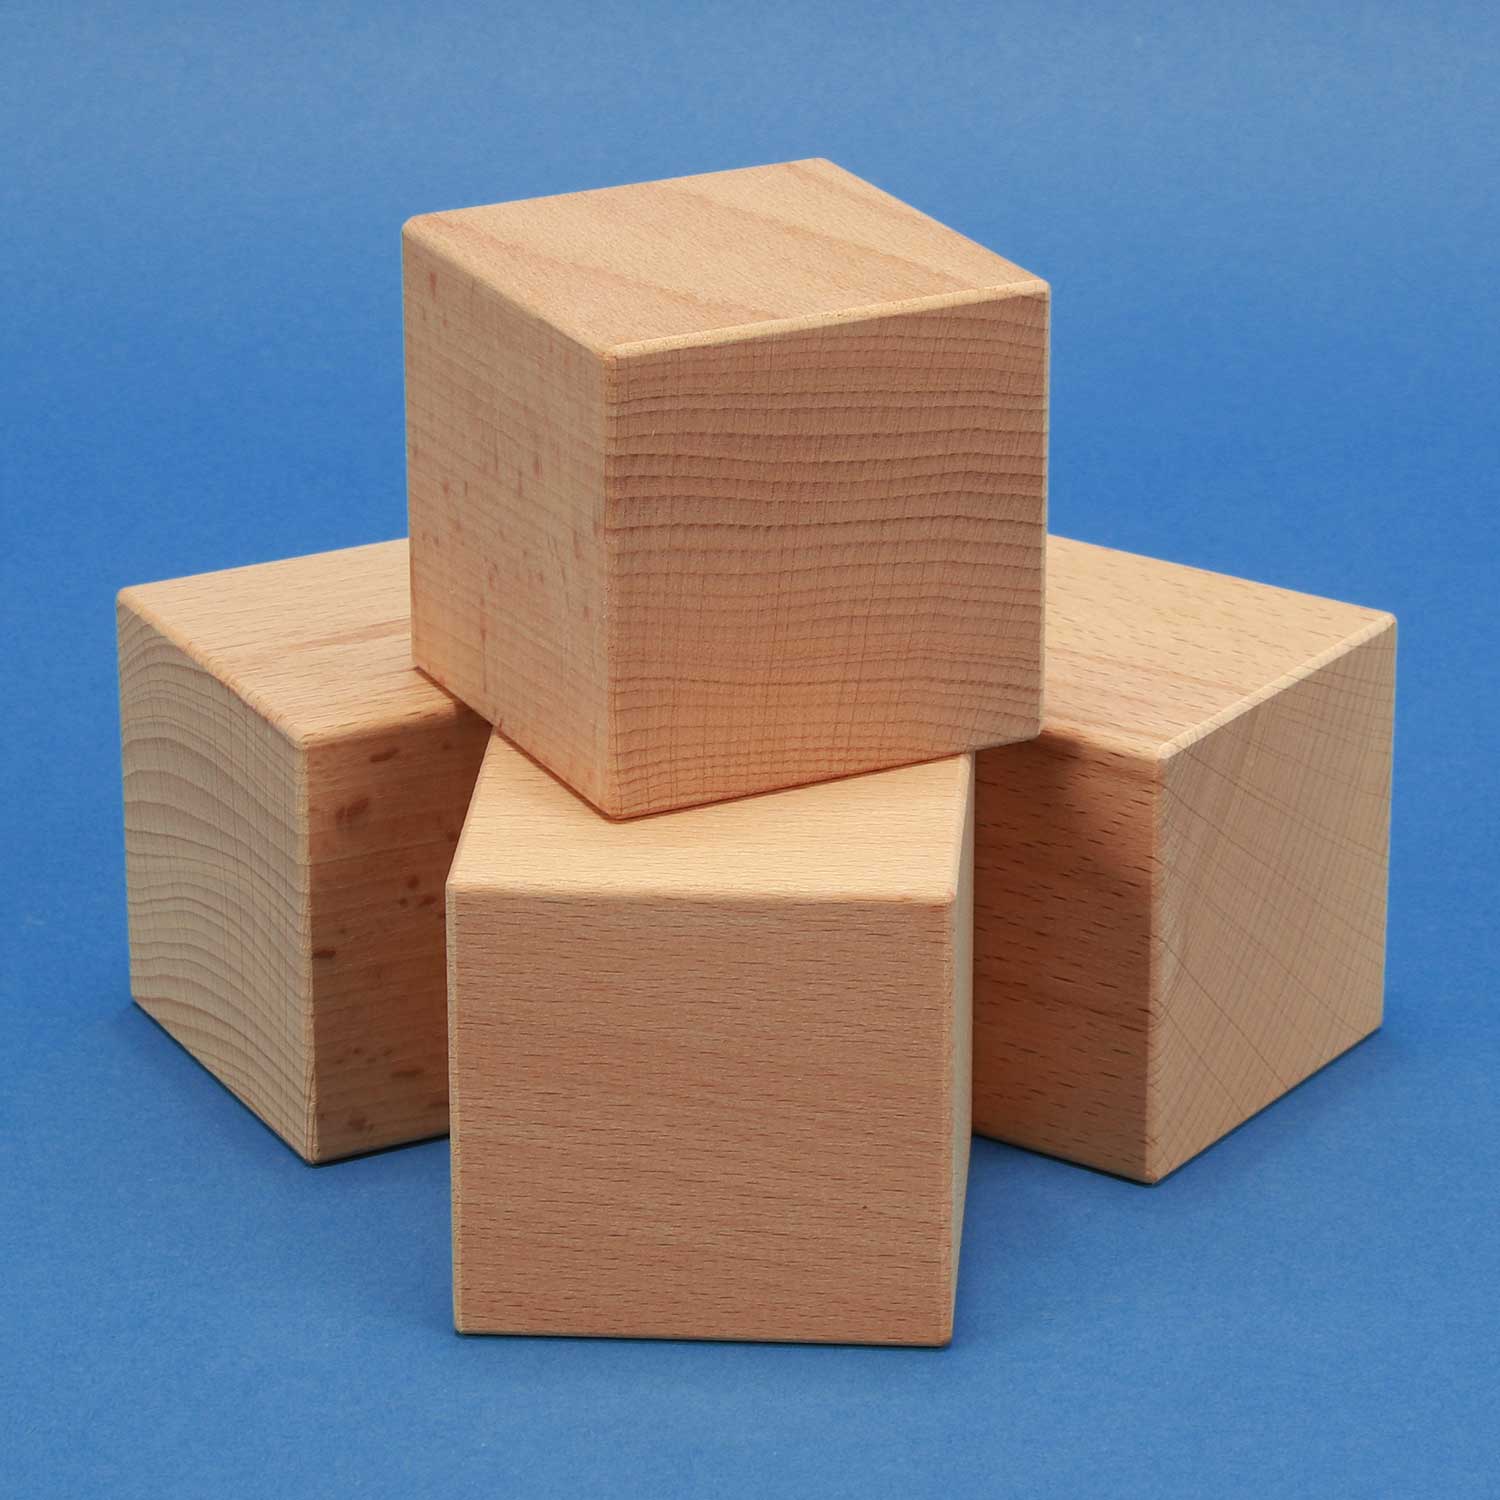 Wooden cubes and dices made of beech, maple, oak and walnut